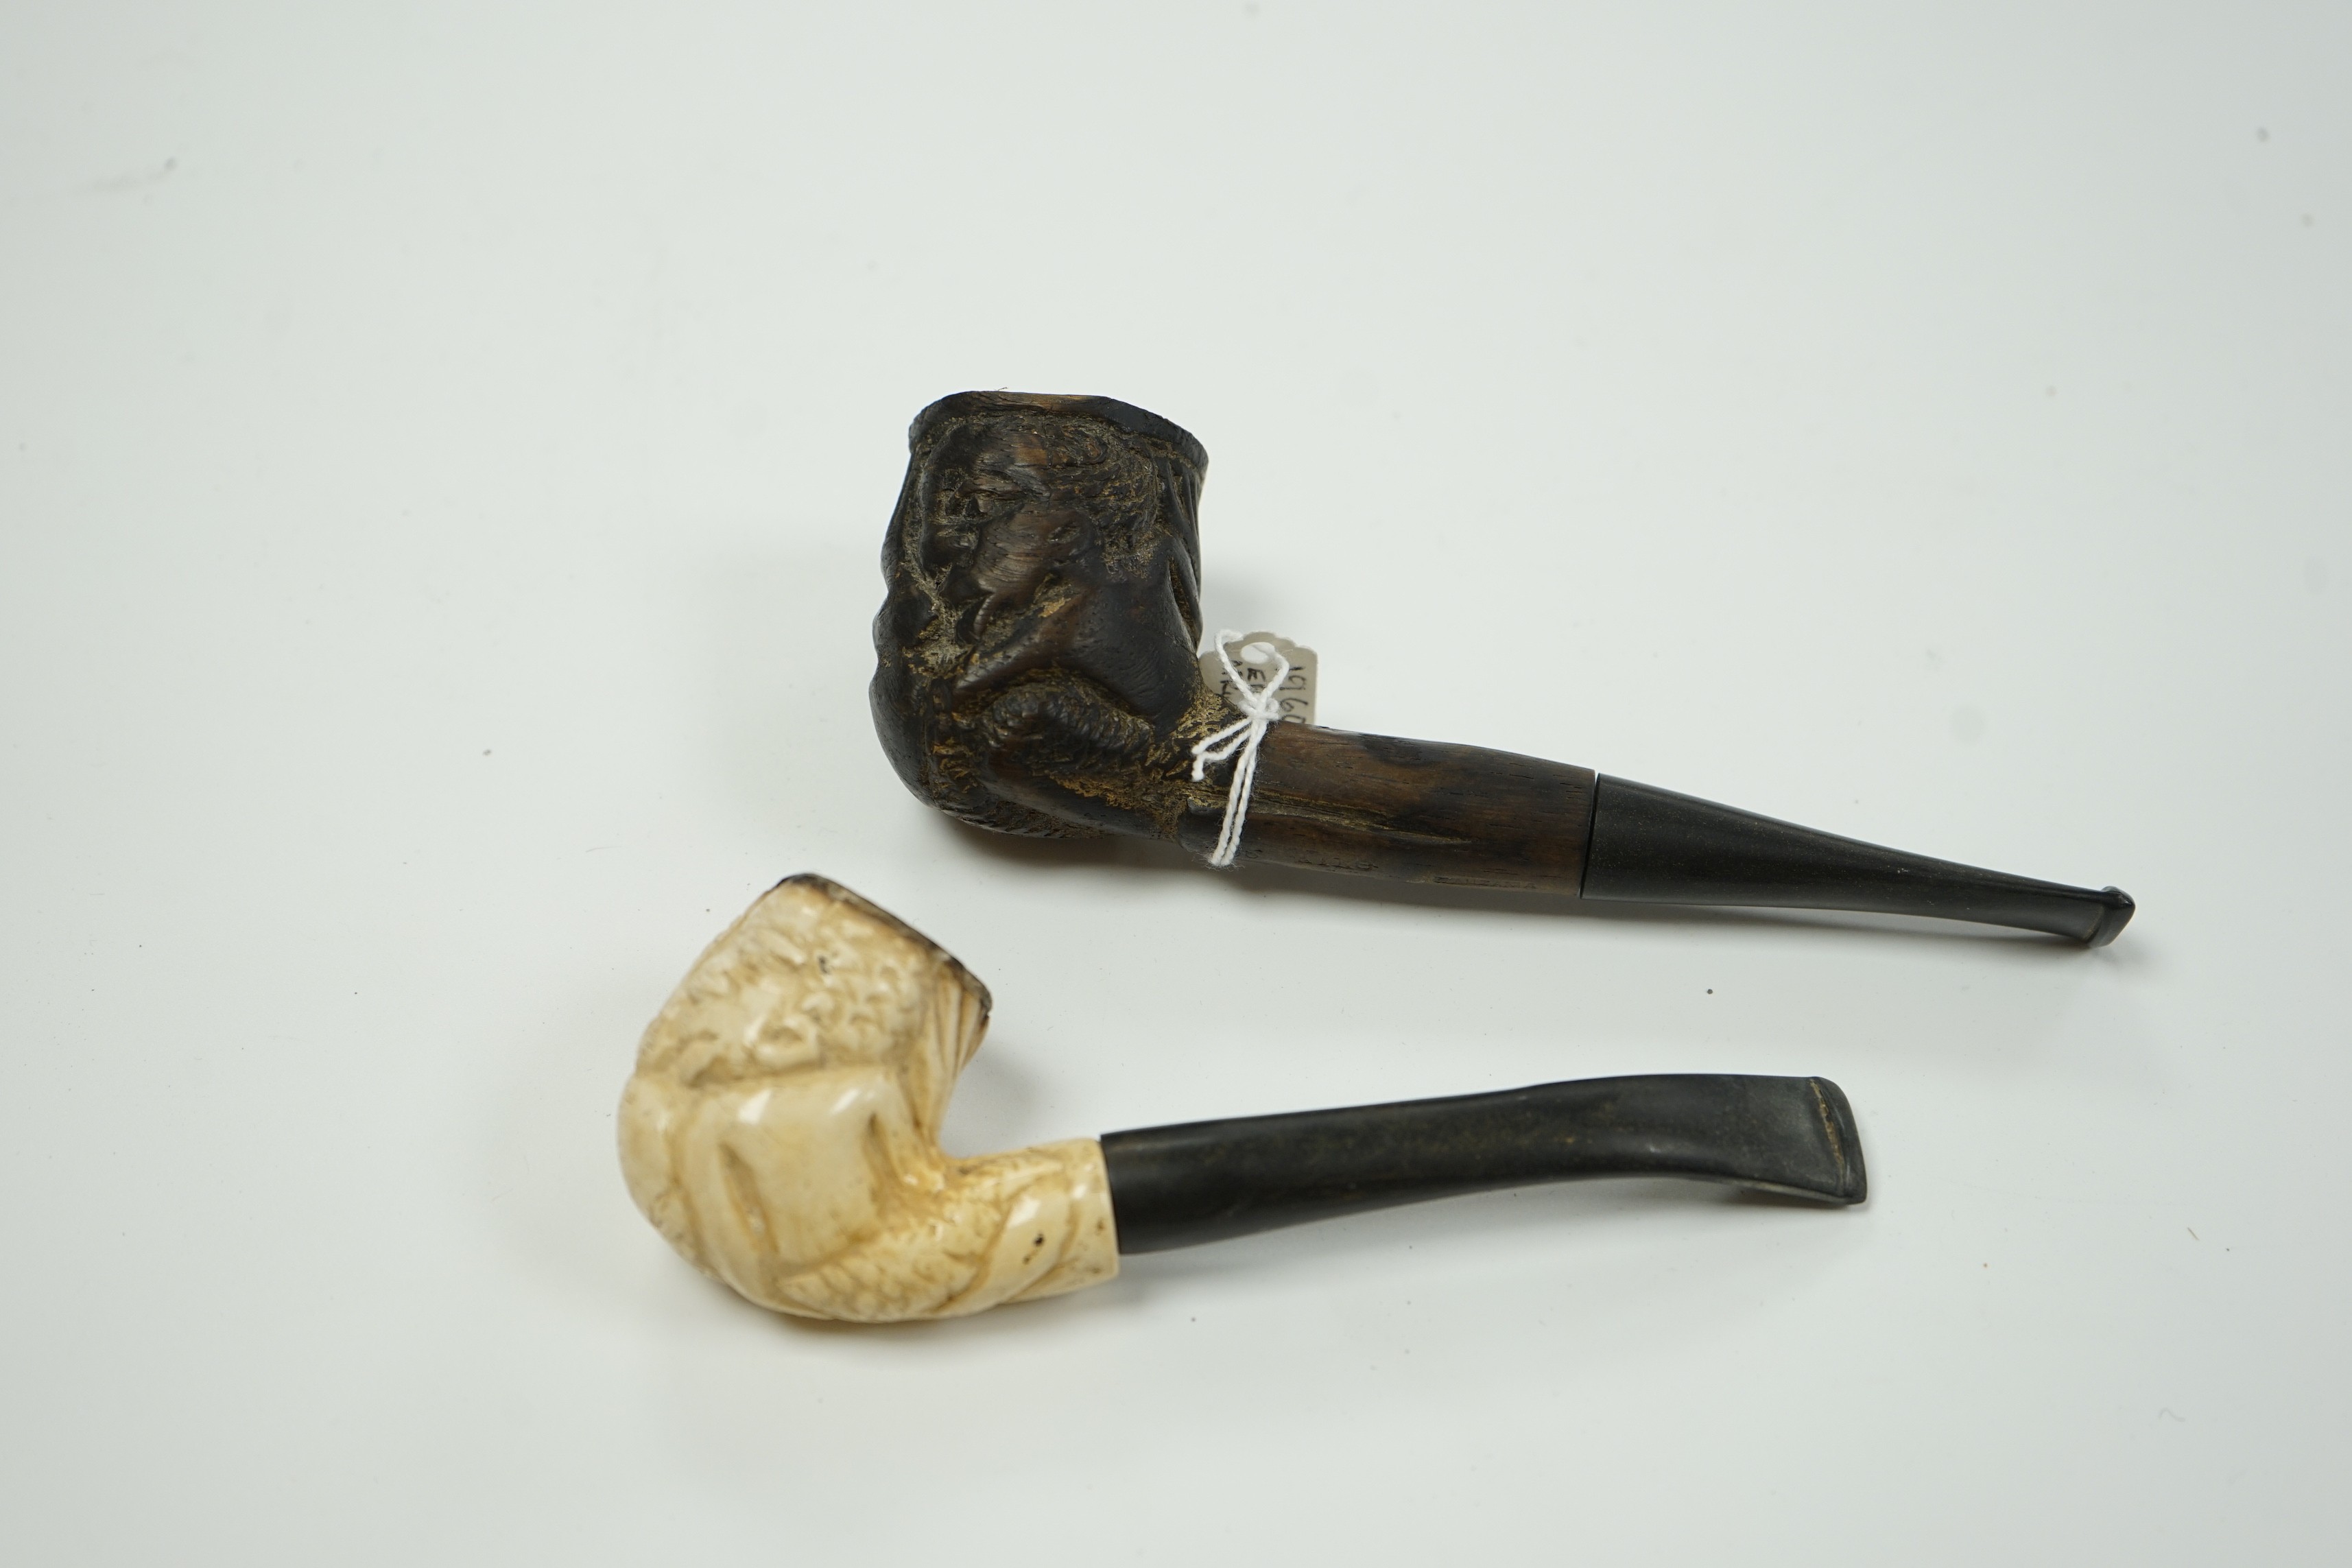 A Meerschaum pipe and an African ebony pipe